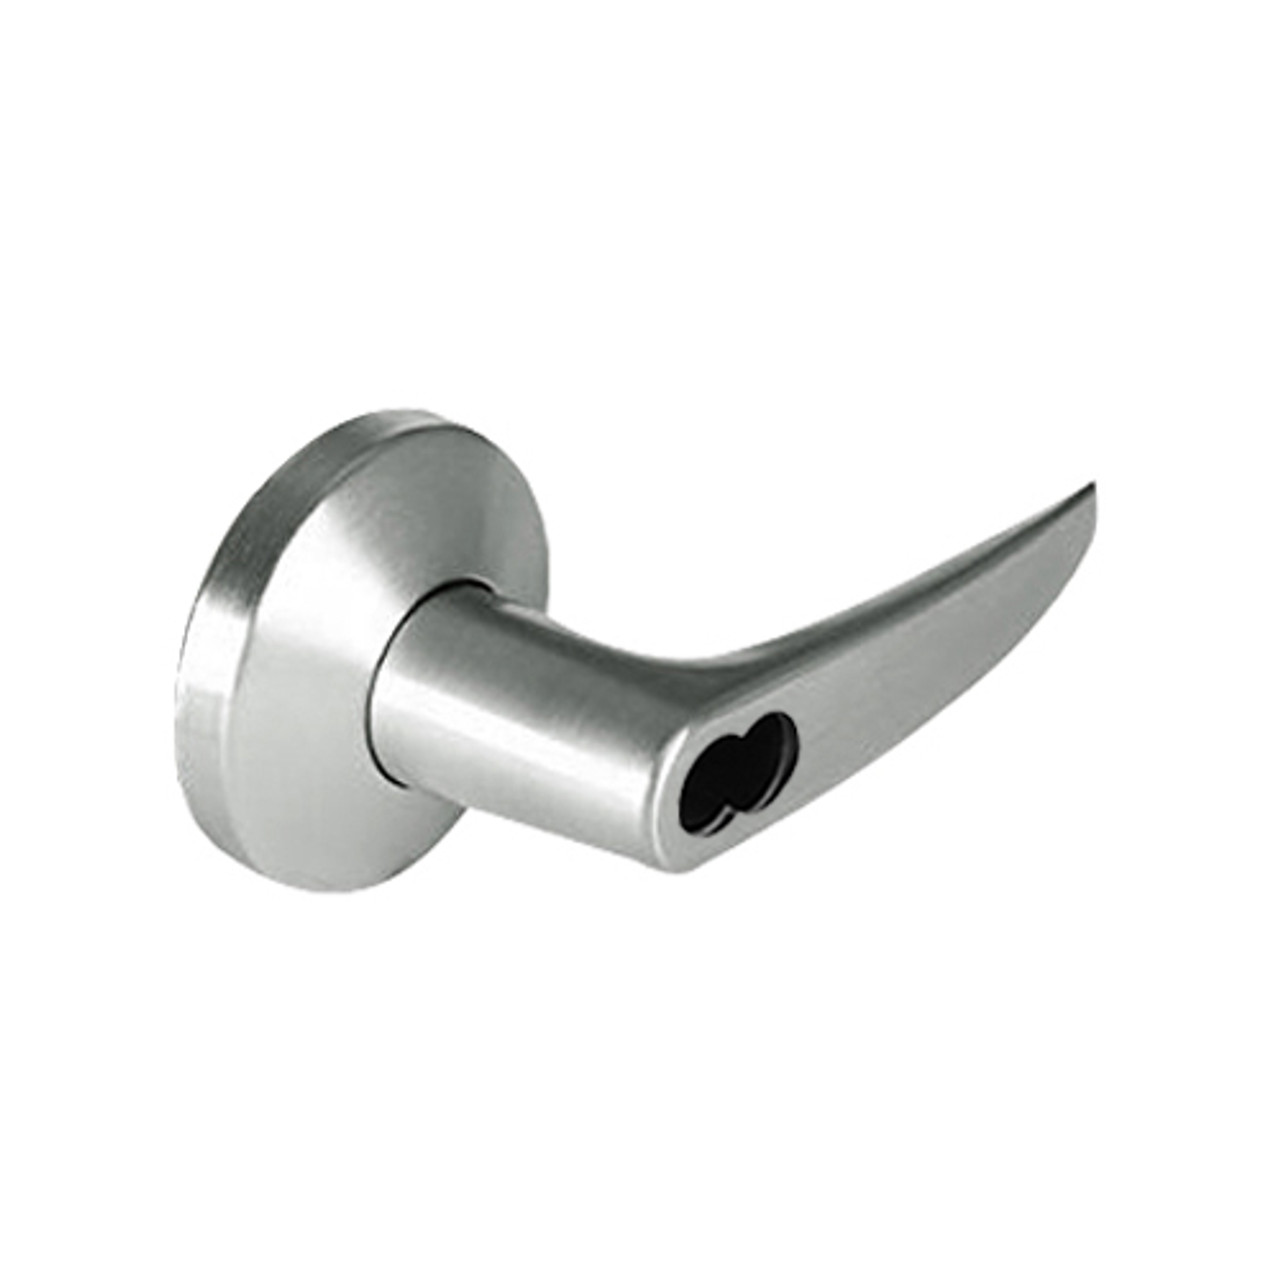 9K37DR16KSTK619 Best 9K Series Special Function Cylindrical Lever Locks with Curved without Return Lever Design Accept 7 Pin Best Core in Satin Nickel